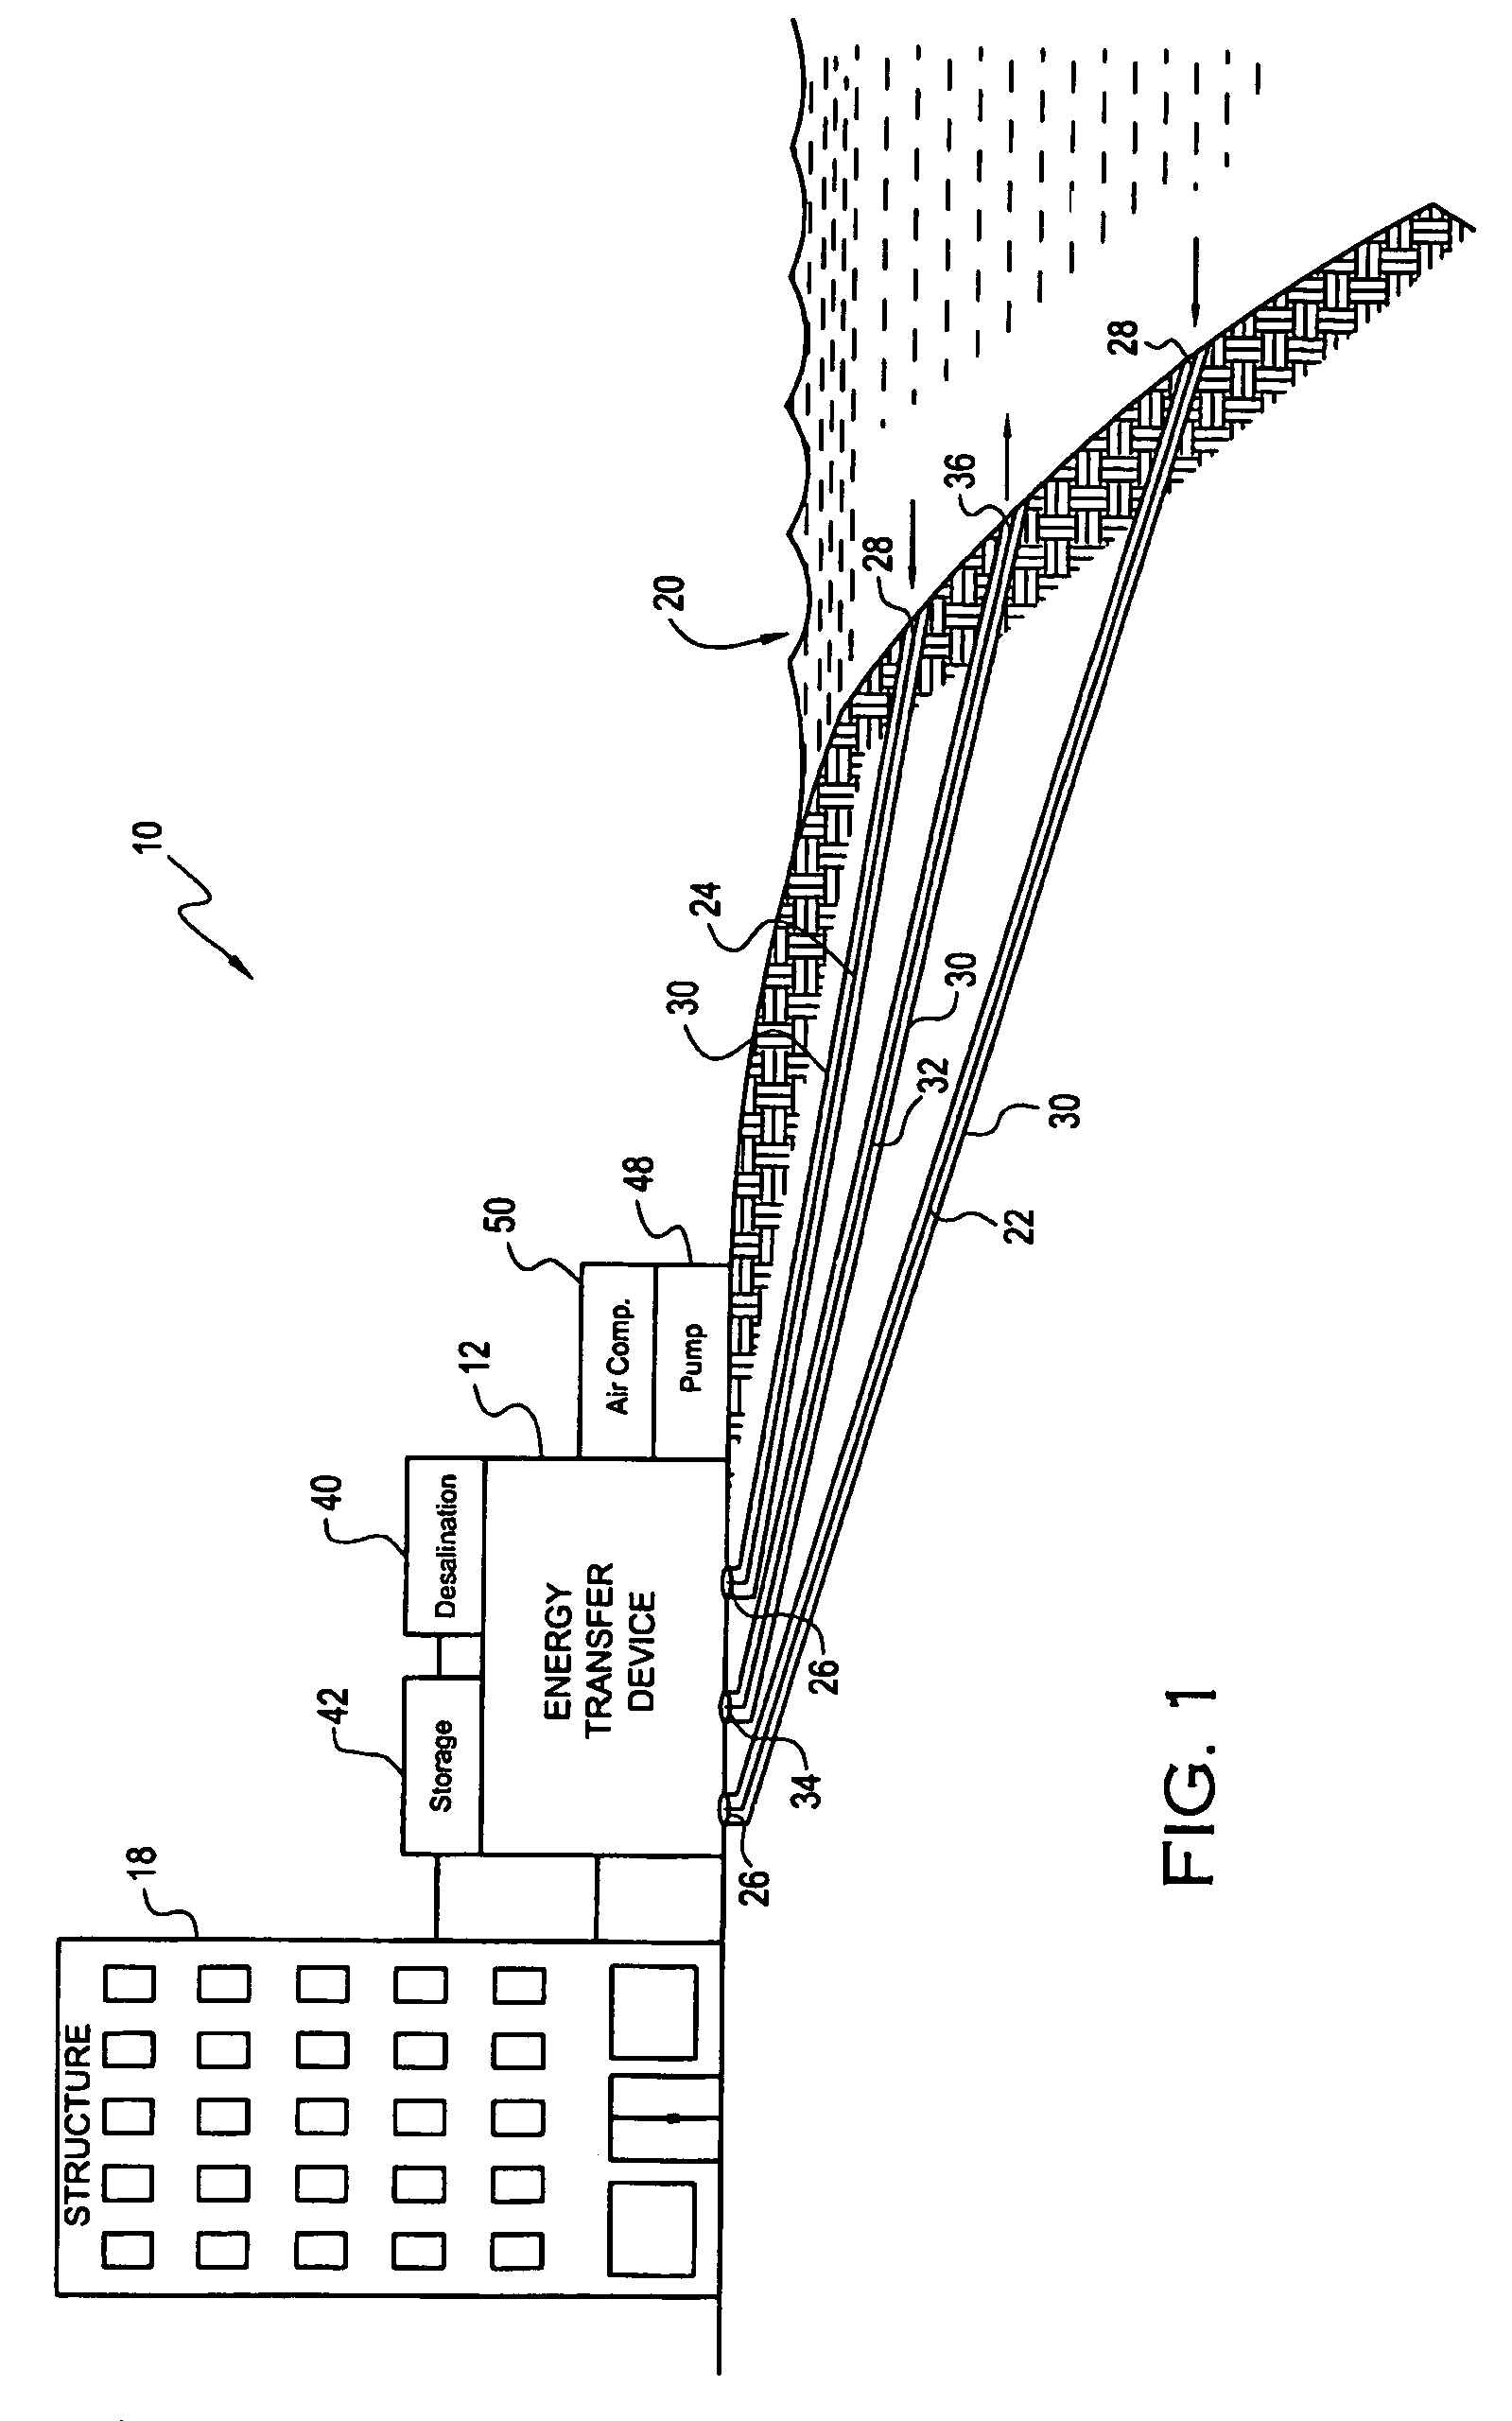 Energy transfer system and associated methods